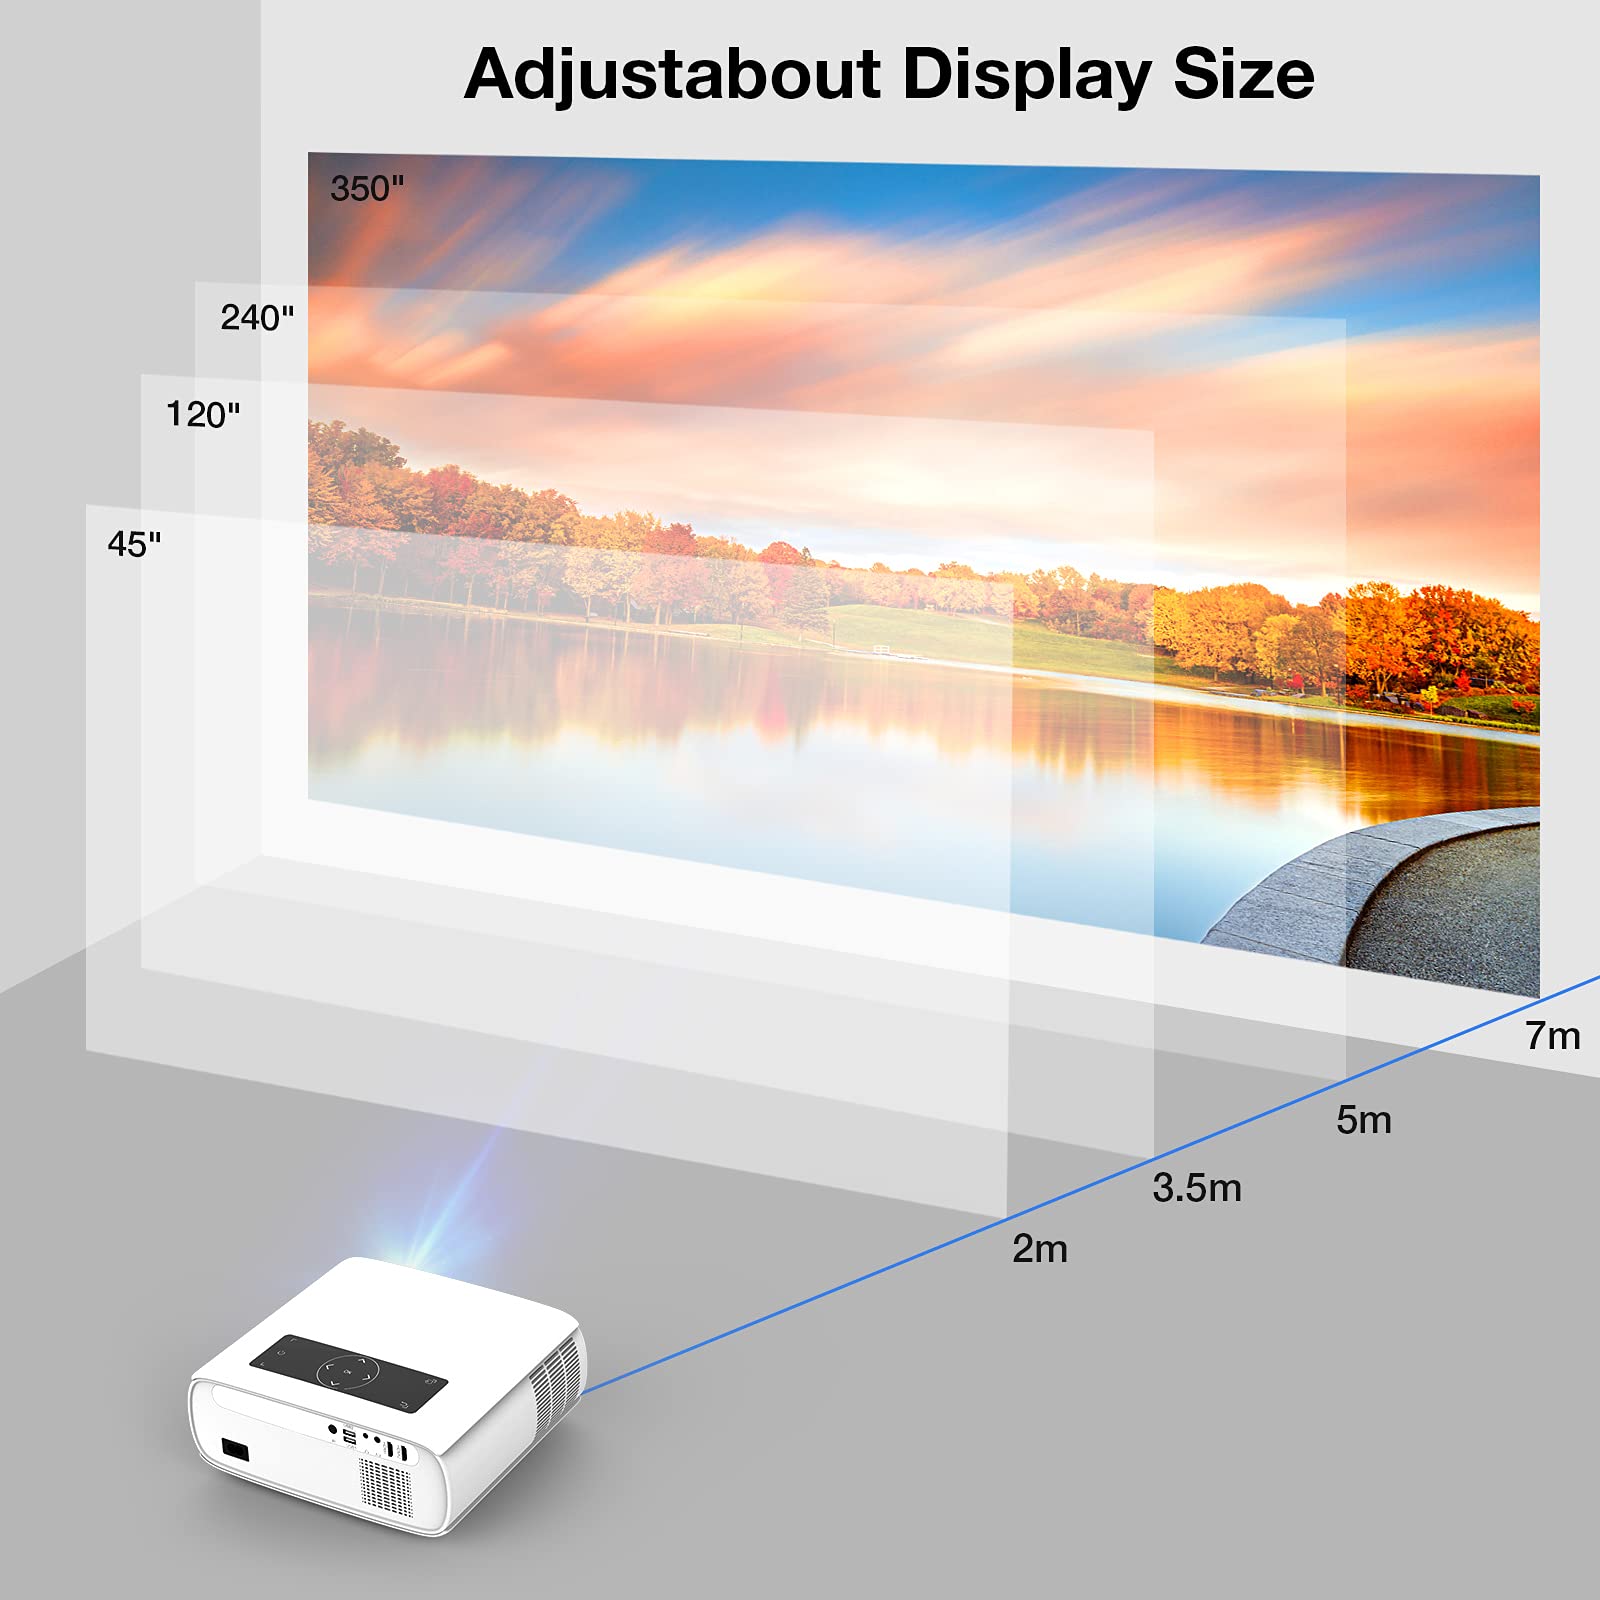 HOPVISION Native 1080P Projector Full HD, 15000Lux Movie Projector with 150000 Hours LED Lamp Life, Support 4K 350